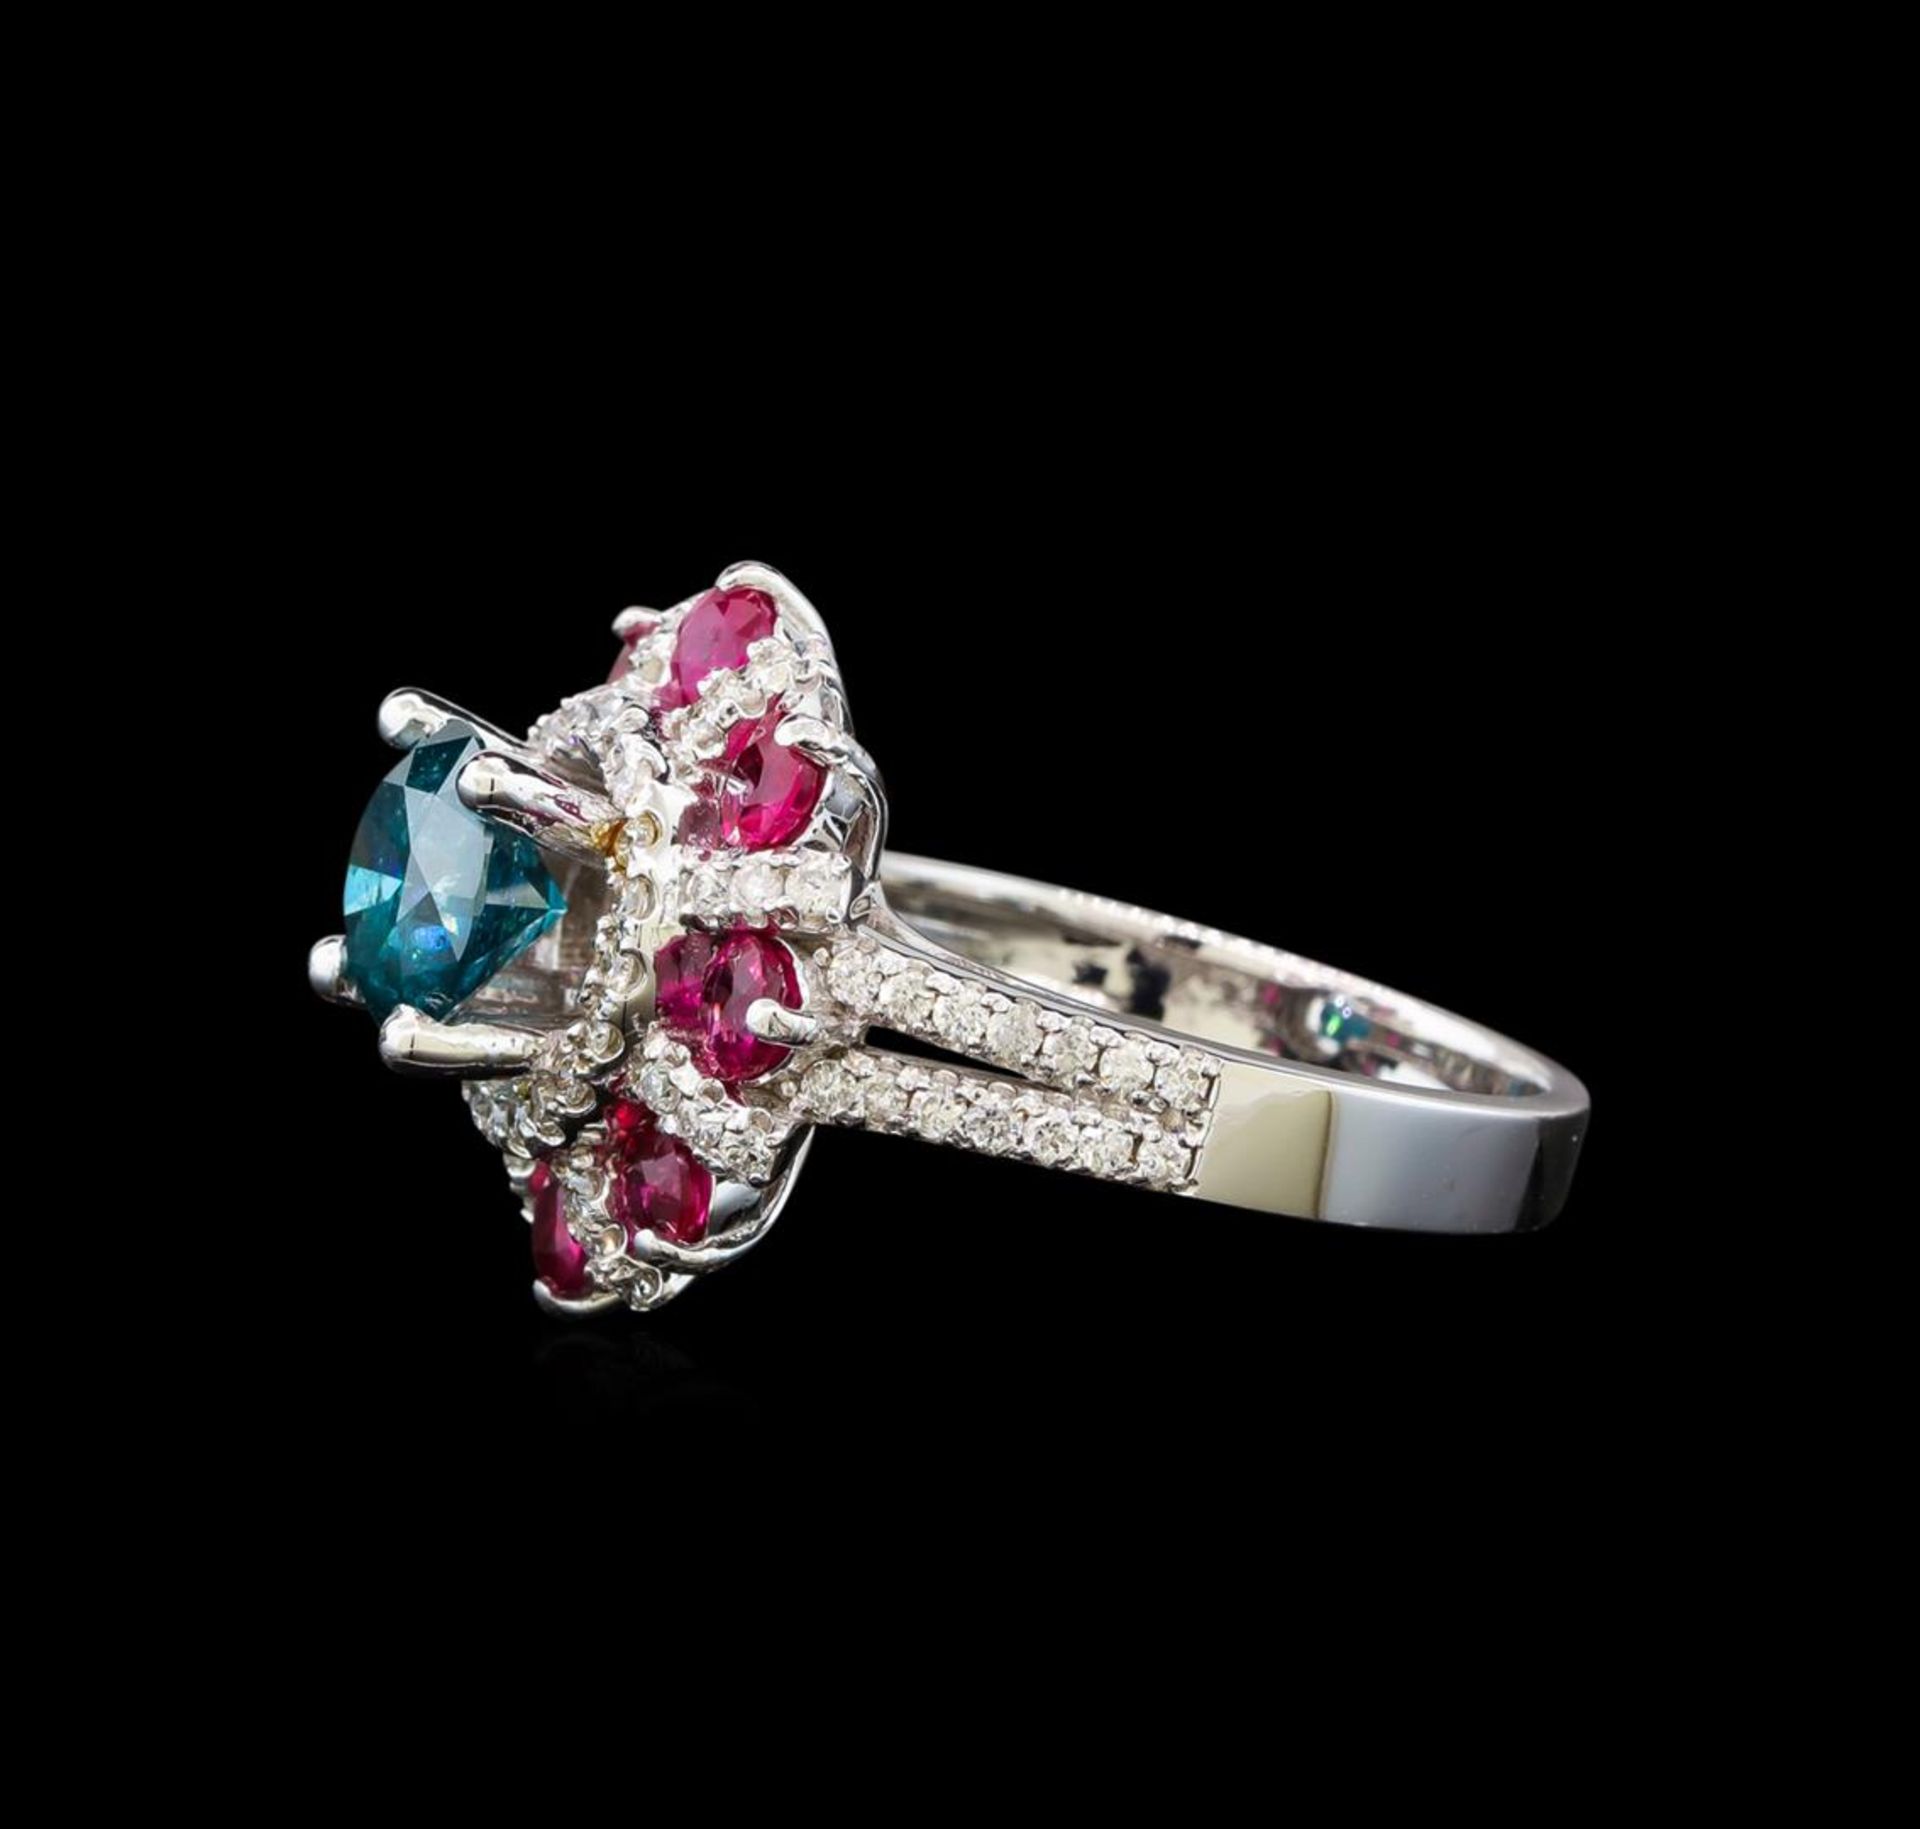 14KT White Gold 1.89 ctw Fancy Blue Diamond and Ruby Ring - Image 3 of 5